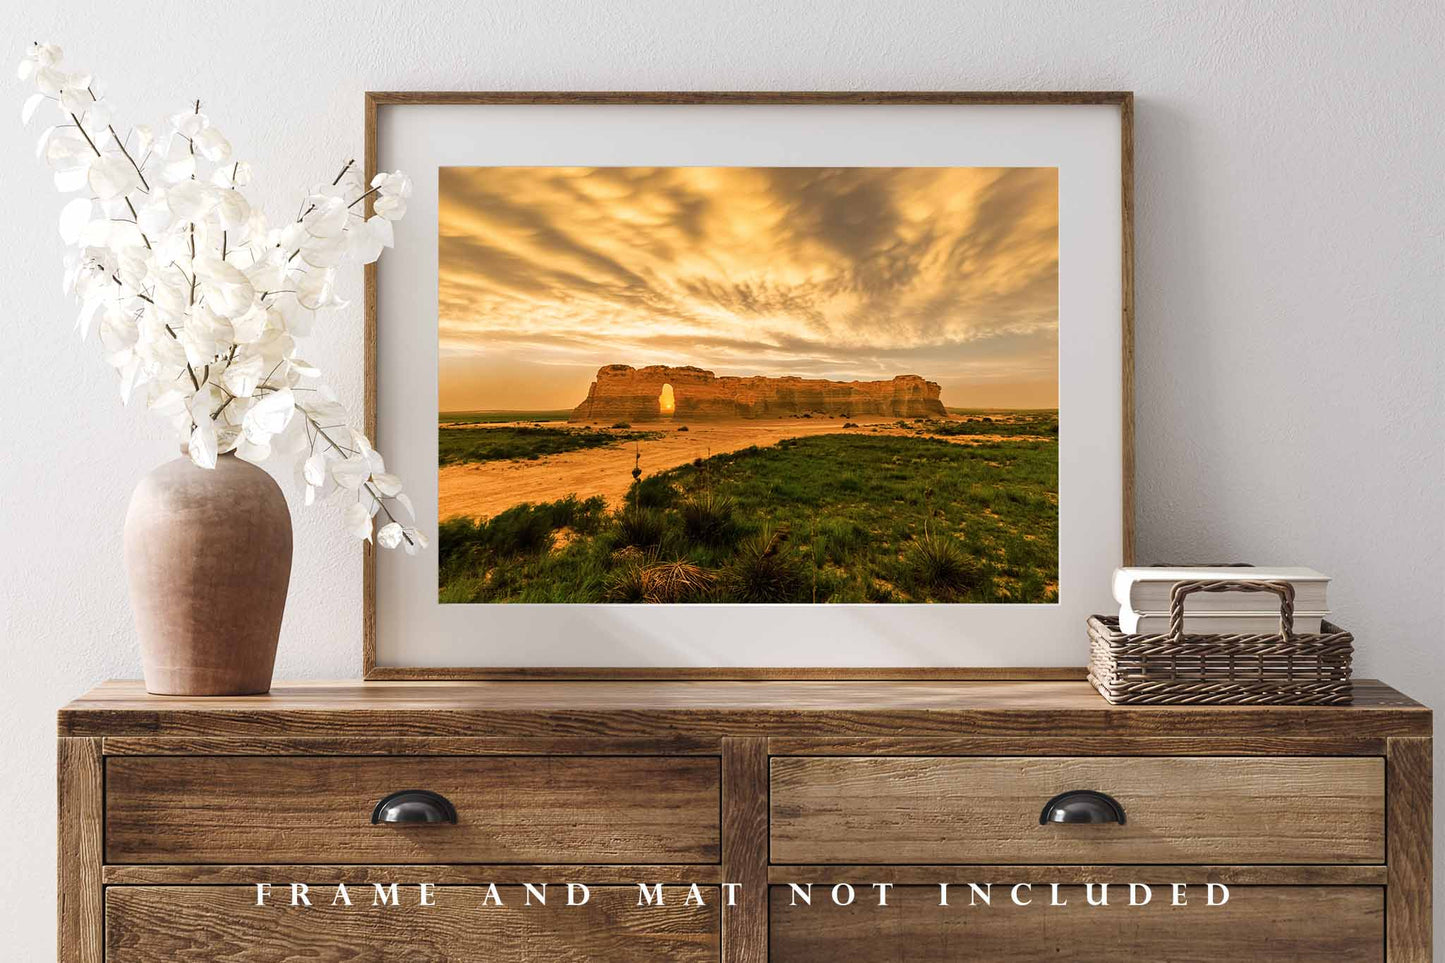 Great Plains Photography Print (Not Framed) Picture of Monument Rocks Under Stormy Sky at Sunset in Kansas Prairie Wall Art Western Decor